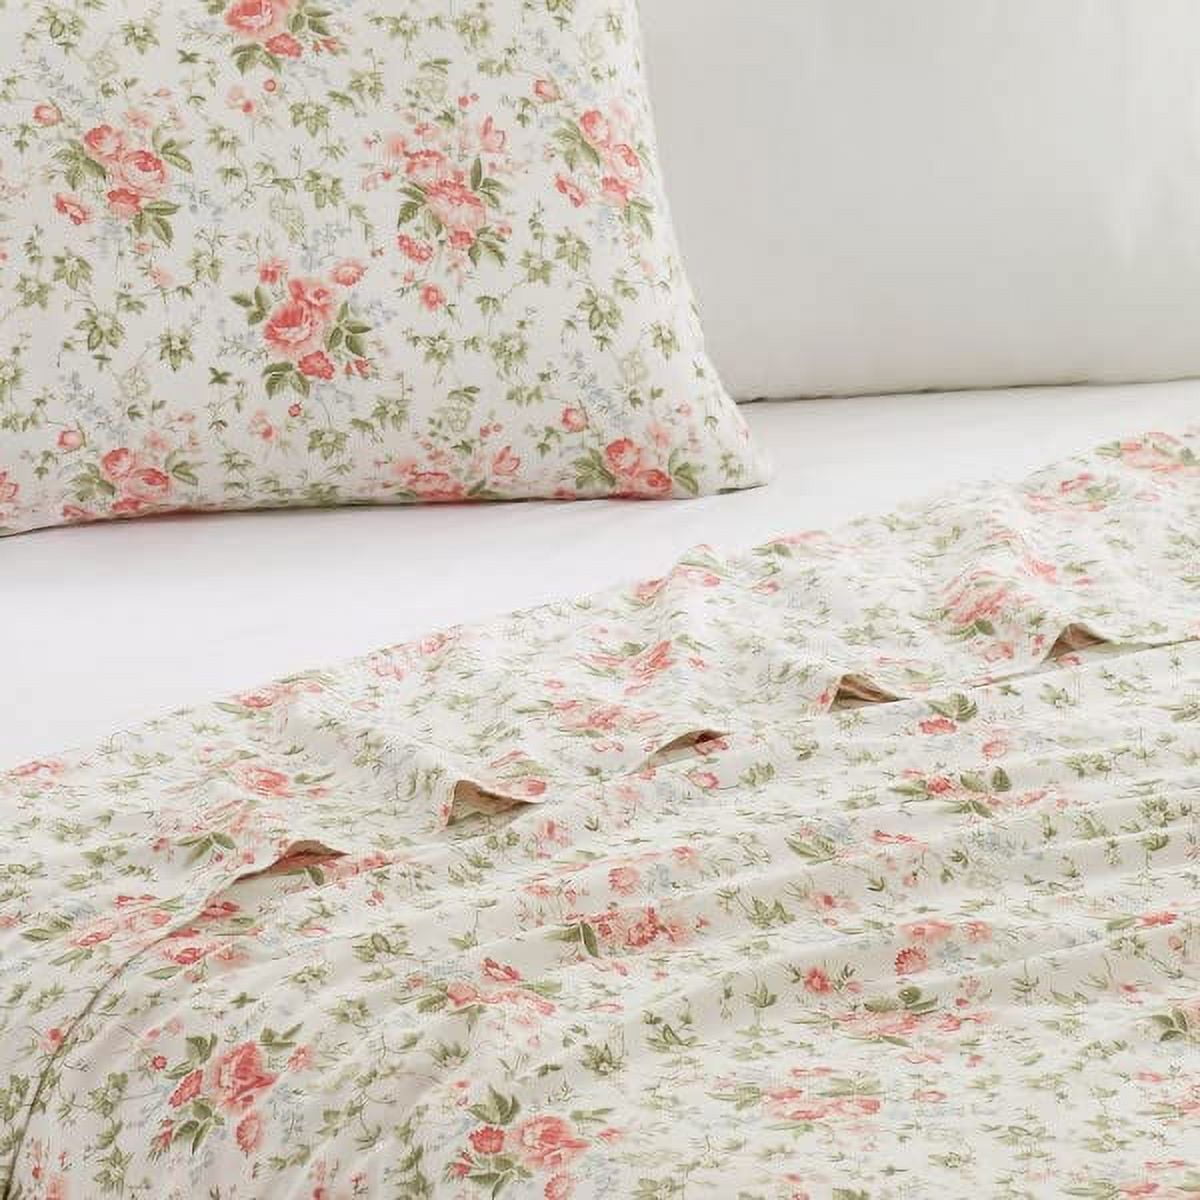 Laura Ashley Wisteria 3-Piece Pink Floral Plush Microfiber Full/Queen  Comforter Set USHSA51125349 - The Home Depot